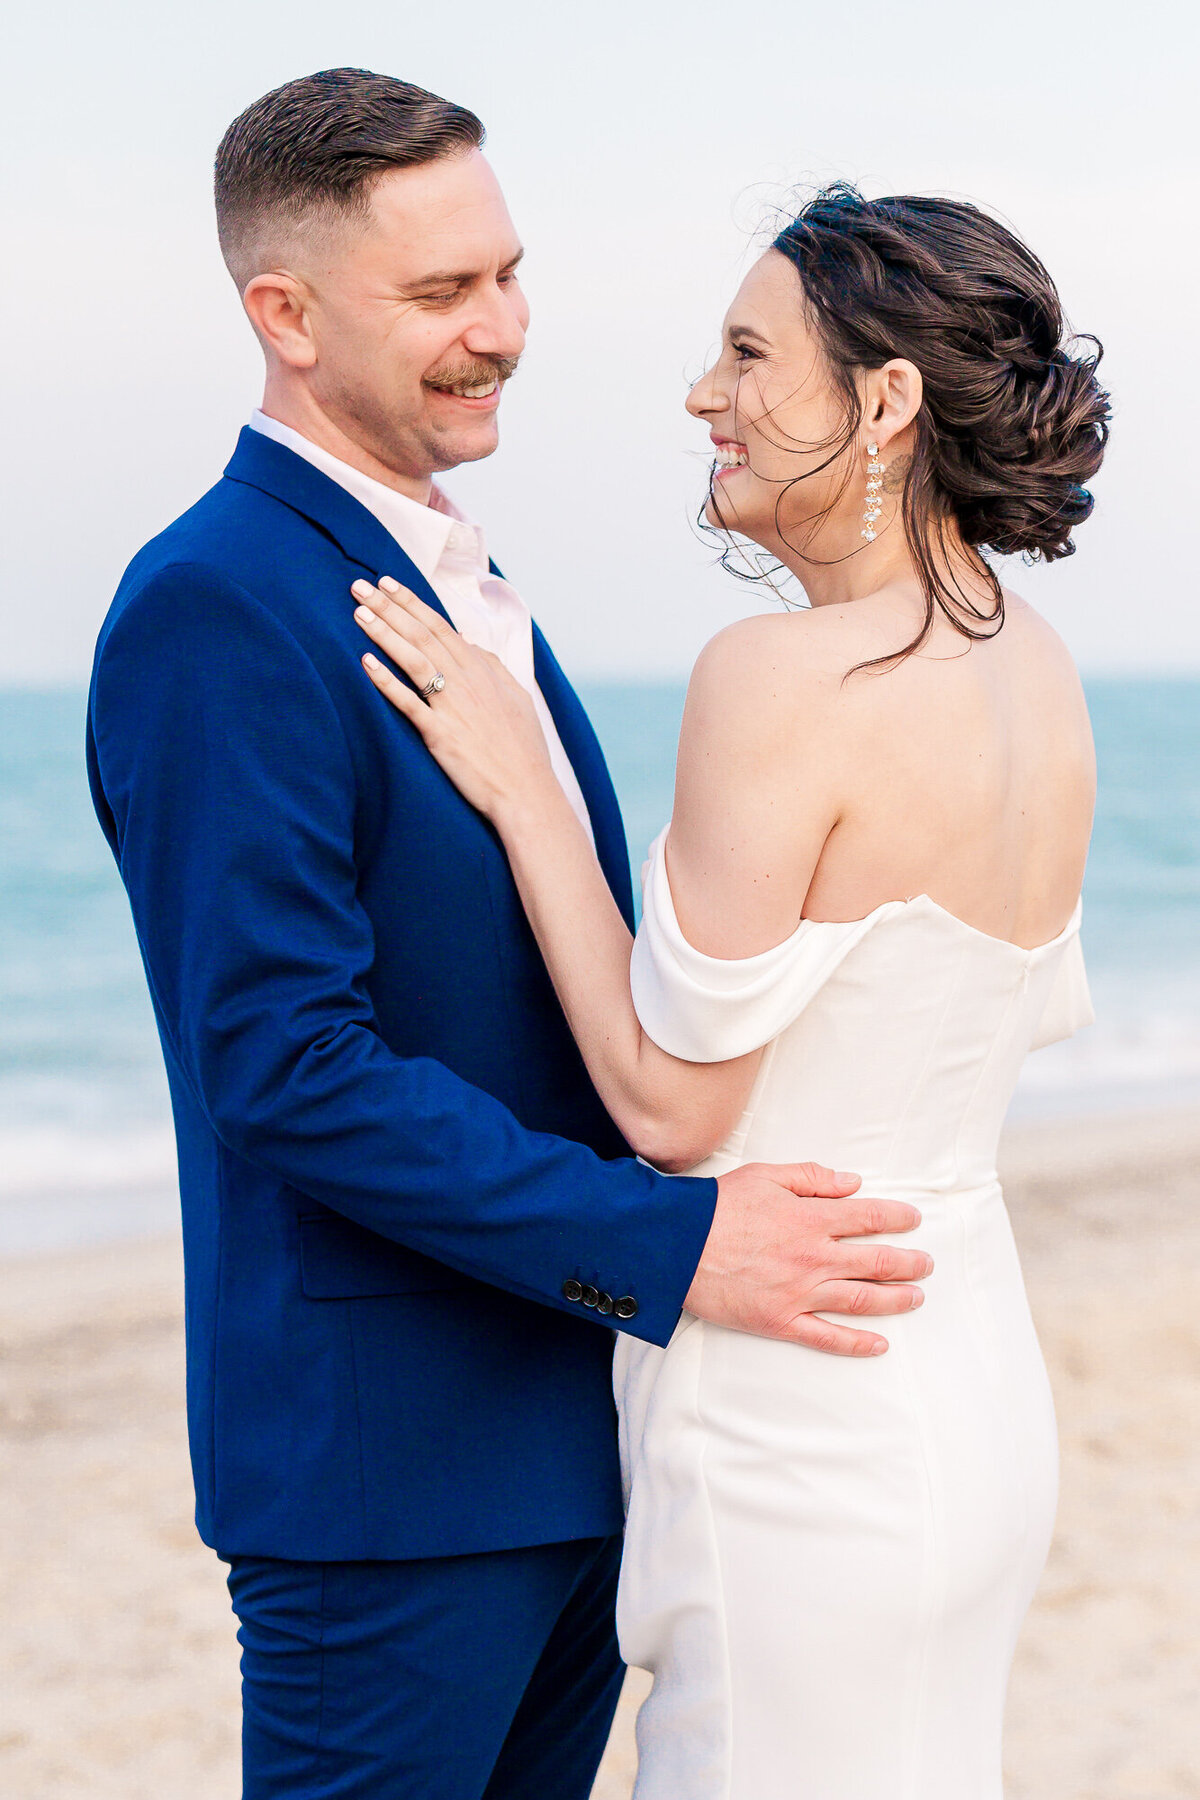 A couple laughing on the beach during their destination wedding in North Carolina by JoLynn Photography, a North Carolina wedding photographer